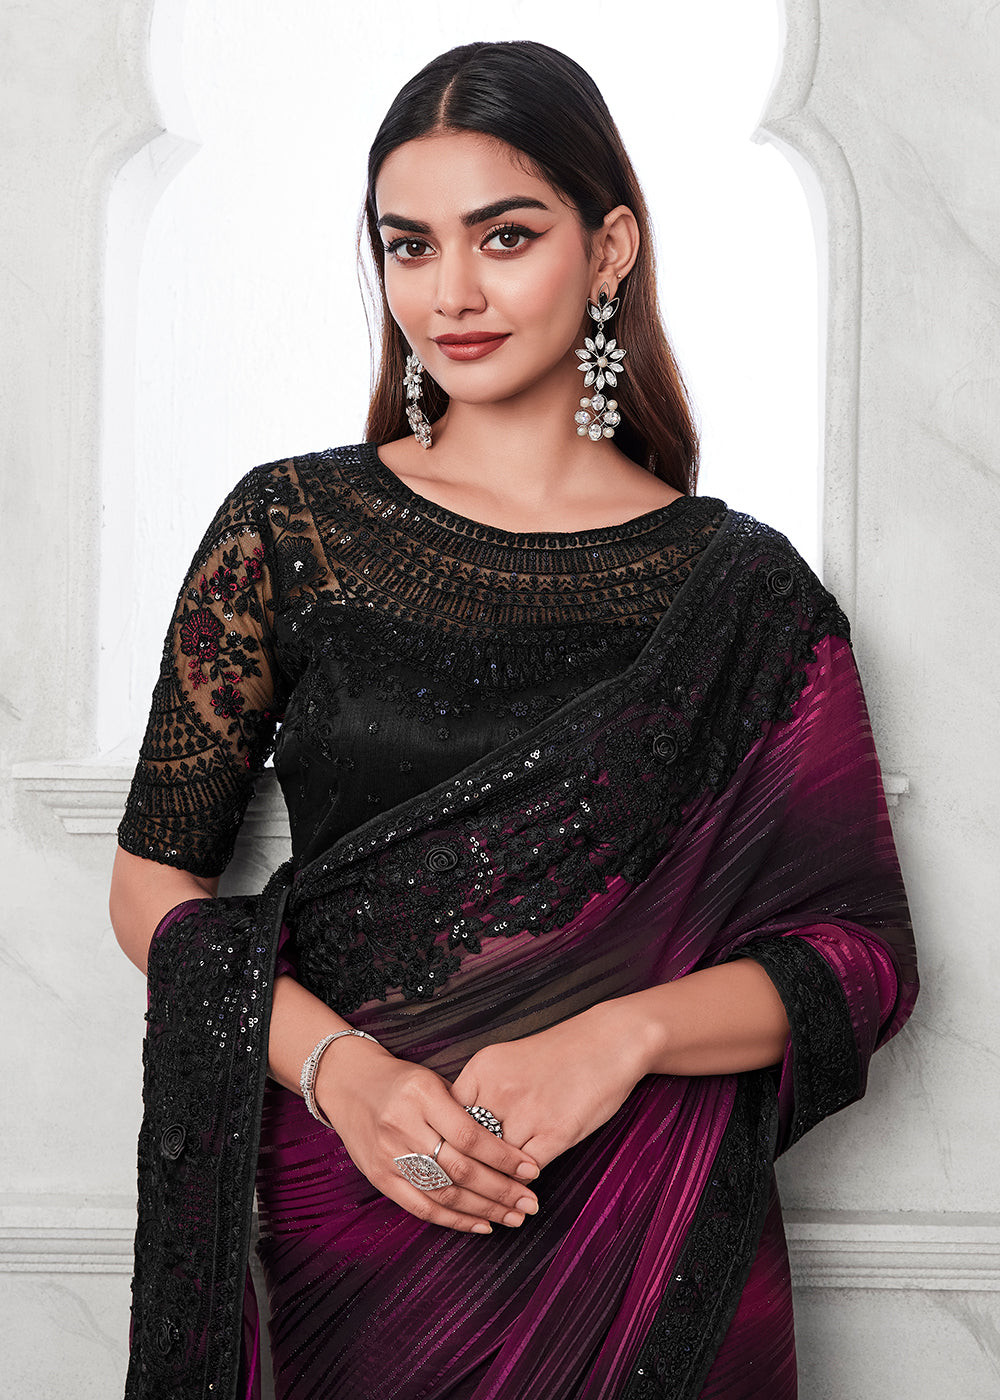 Buy Now Lovely Plum Purple Silk Embroidered Designer Saree Online in USA, UK, Canada & Worldwide at Empress Clothing.